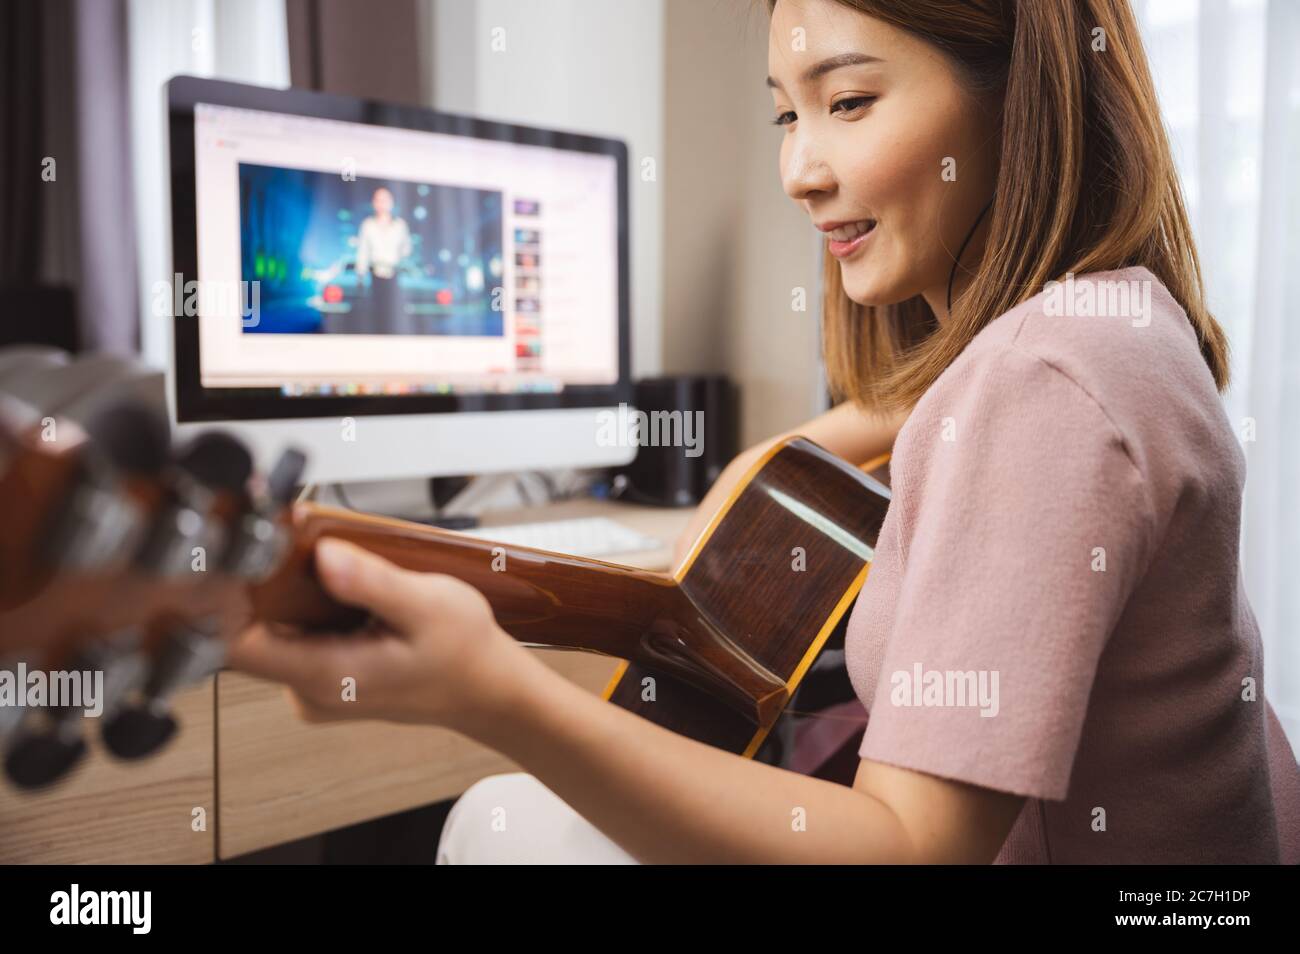 Asian woman guitar player and vlogger playing guitar in the front computer at home while social distancing of coronavirus outbreak Stock Photo